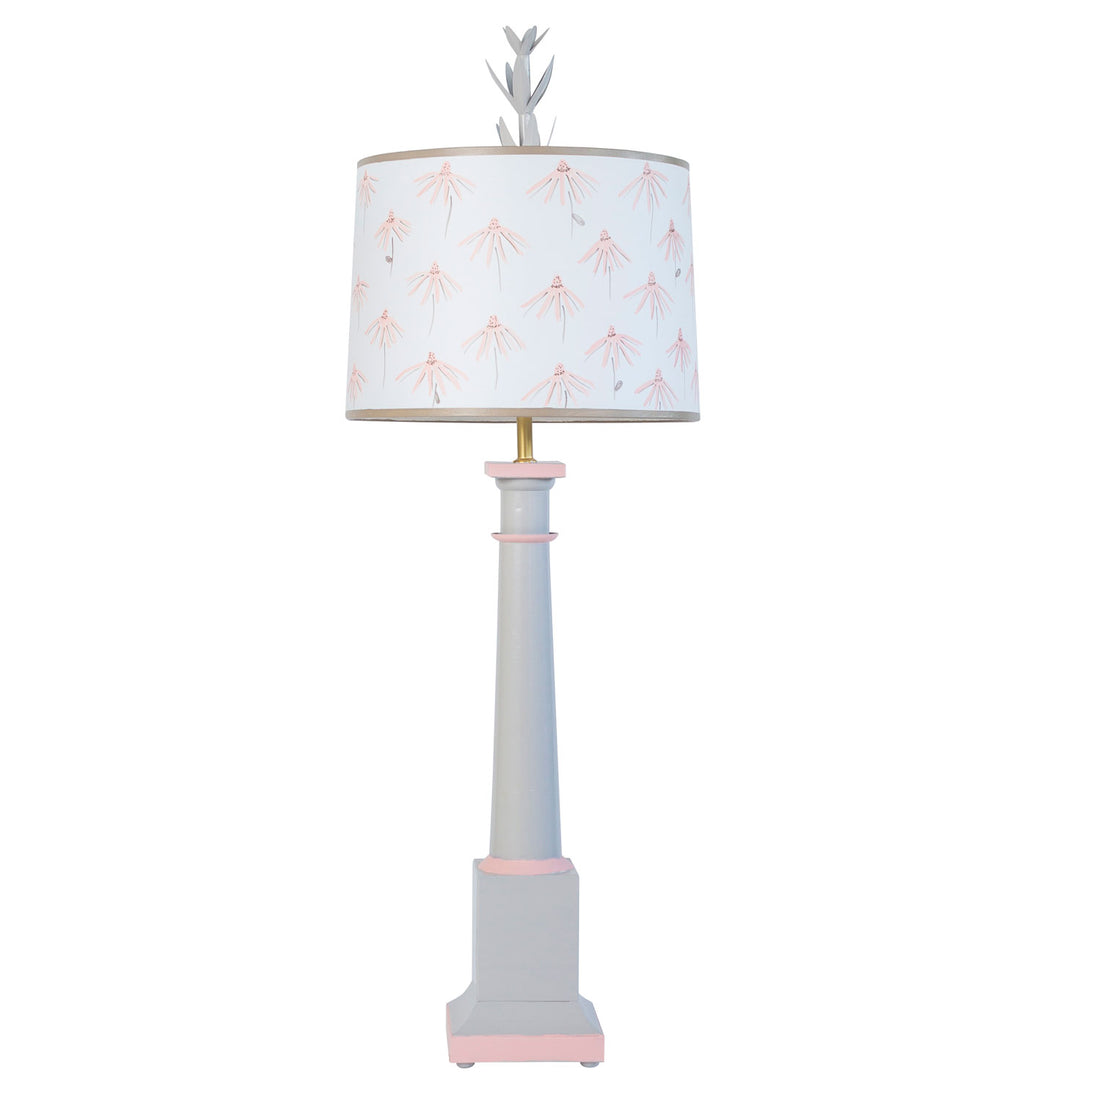 gray and pink table lamp, painted cone flowers and tole